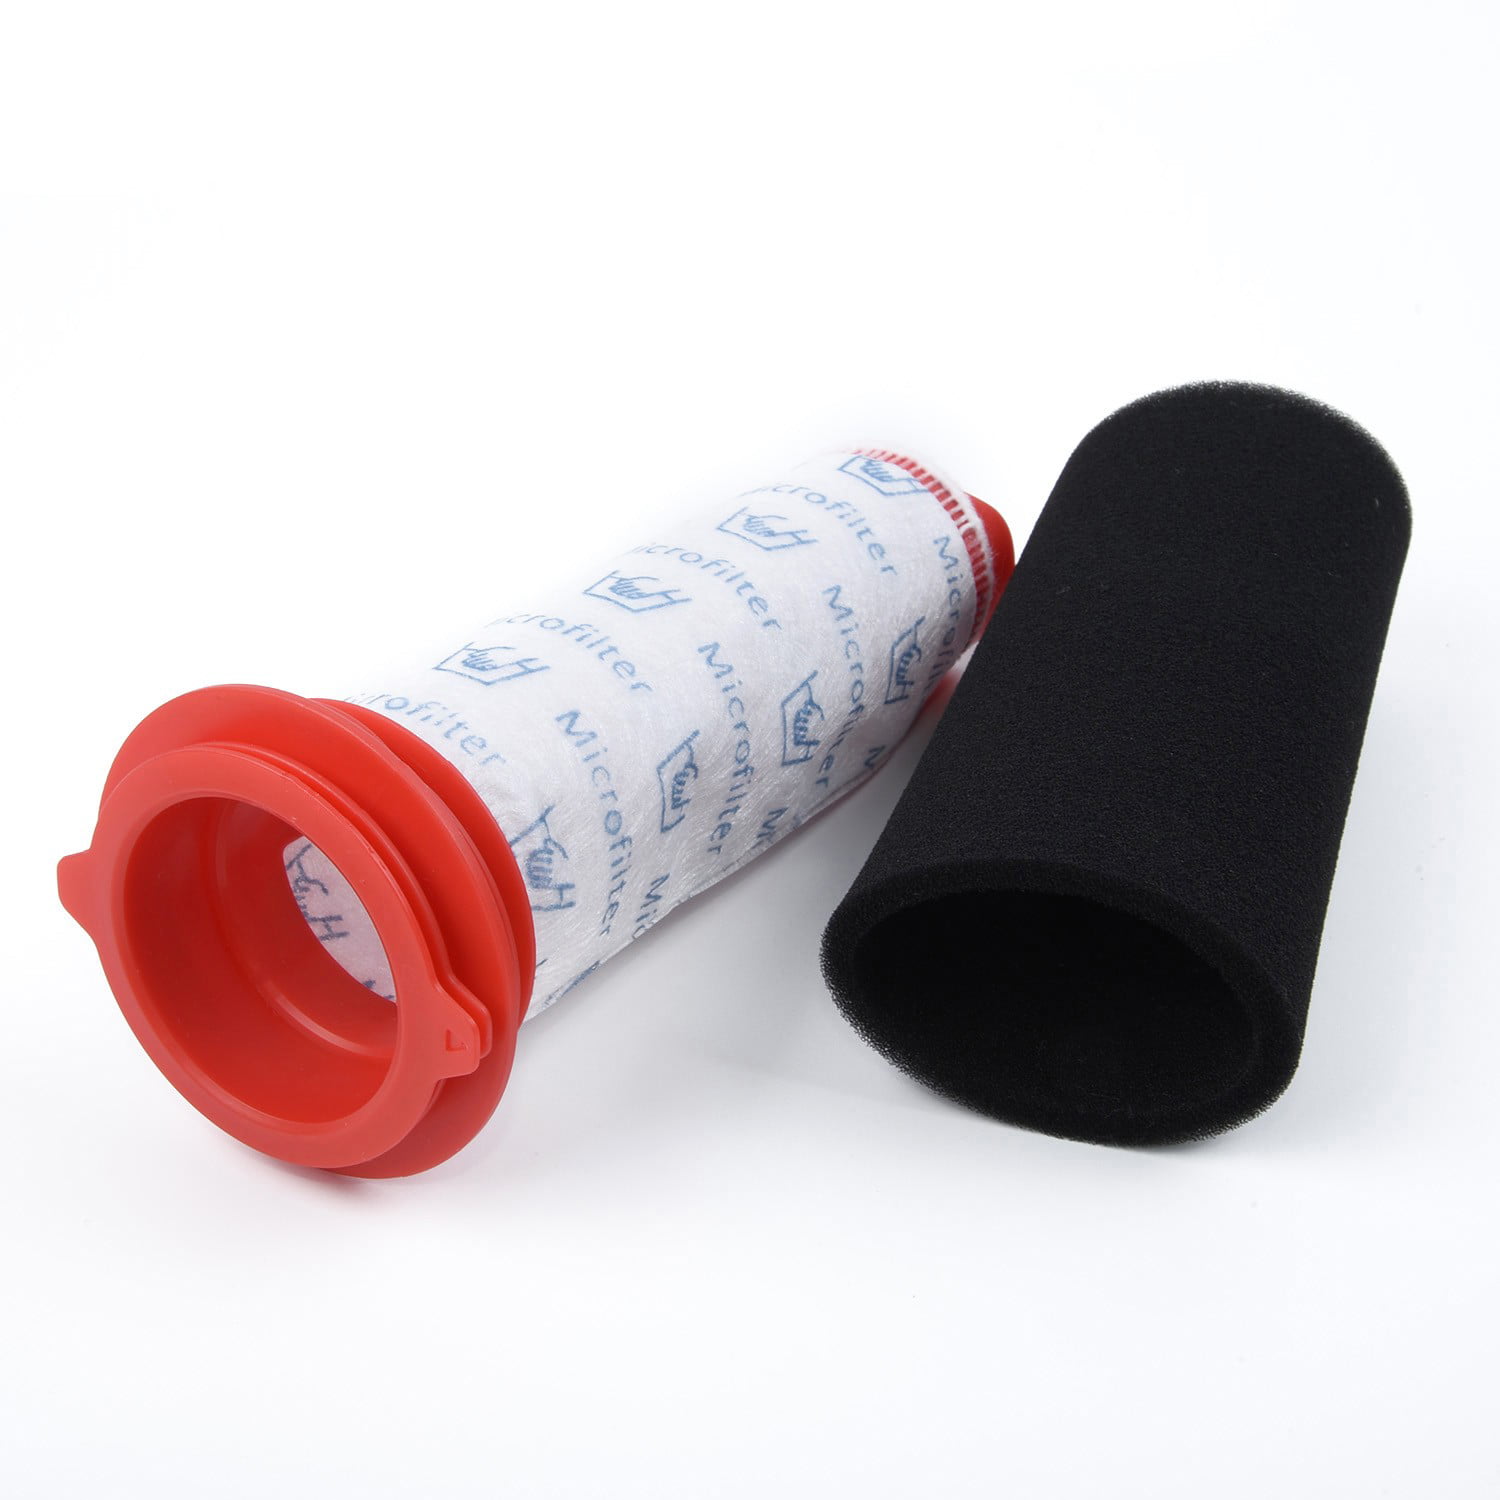 Details about   Foam Microsan Stick Filter For Bosch Athlet Cordless Vacuum Cleaner Home Tool ne 